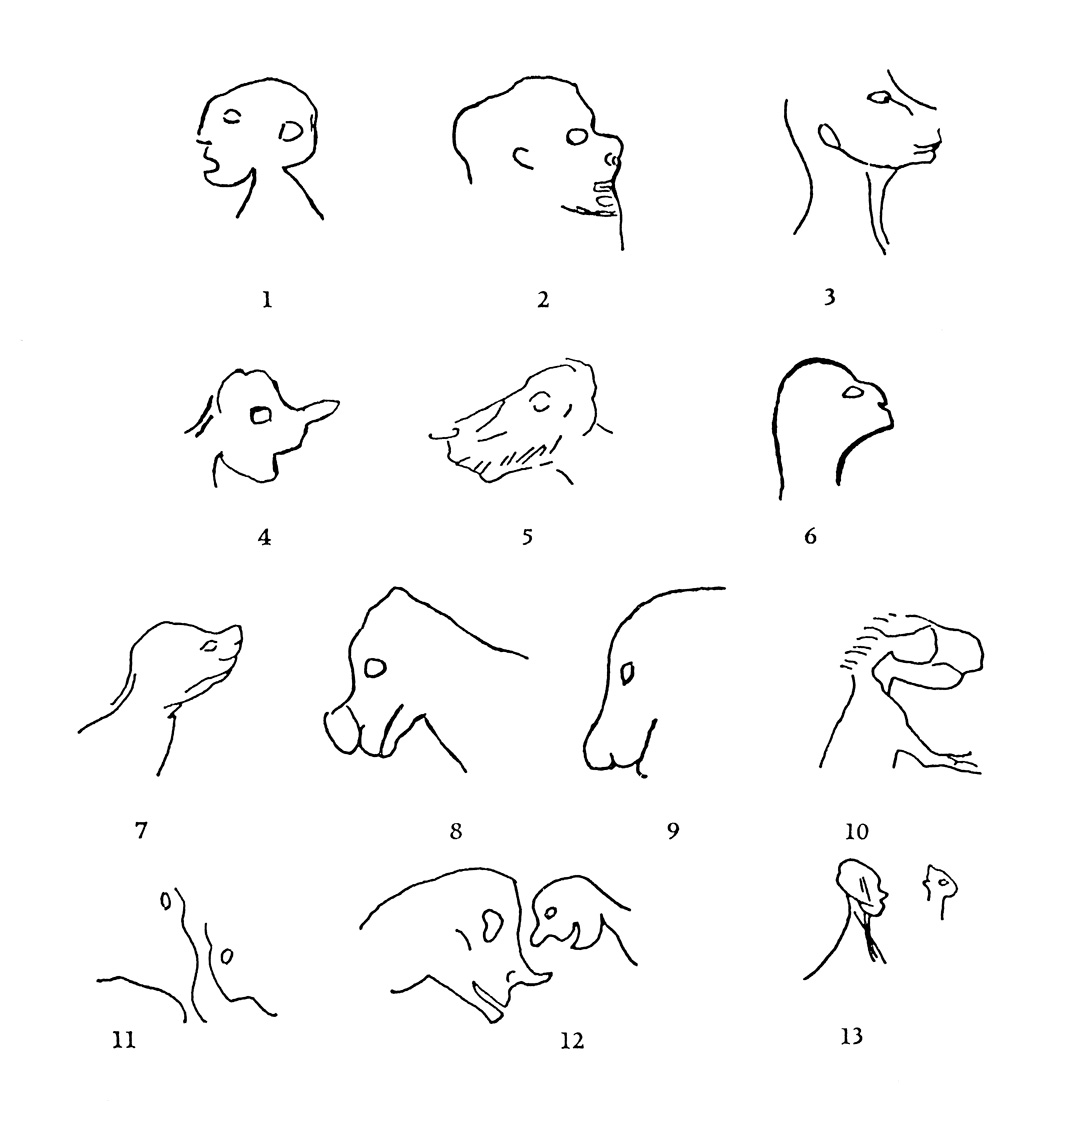 Drawings from André Leroi-Gourhan’s nineteen sixty eight book ”The Art of Prehistoric Man in Western Europe.” The drawings depict male profiles ranging from normal to completely animalized.